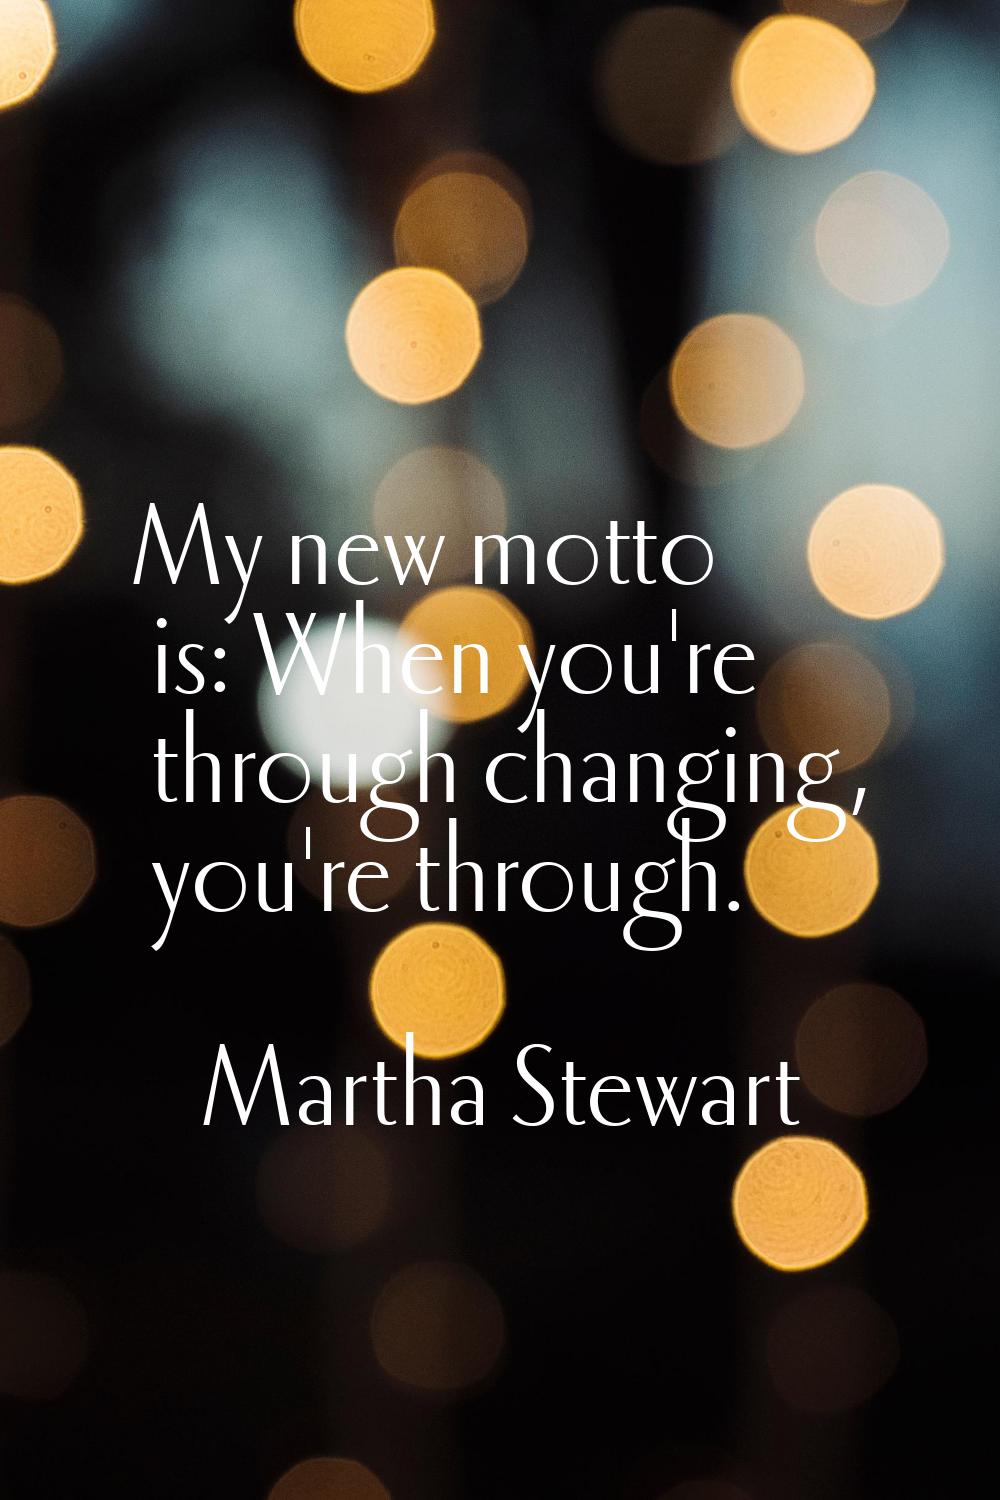 My new motto is: When you're through changing, you're through.